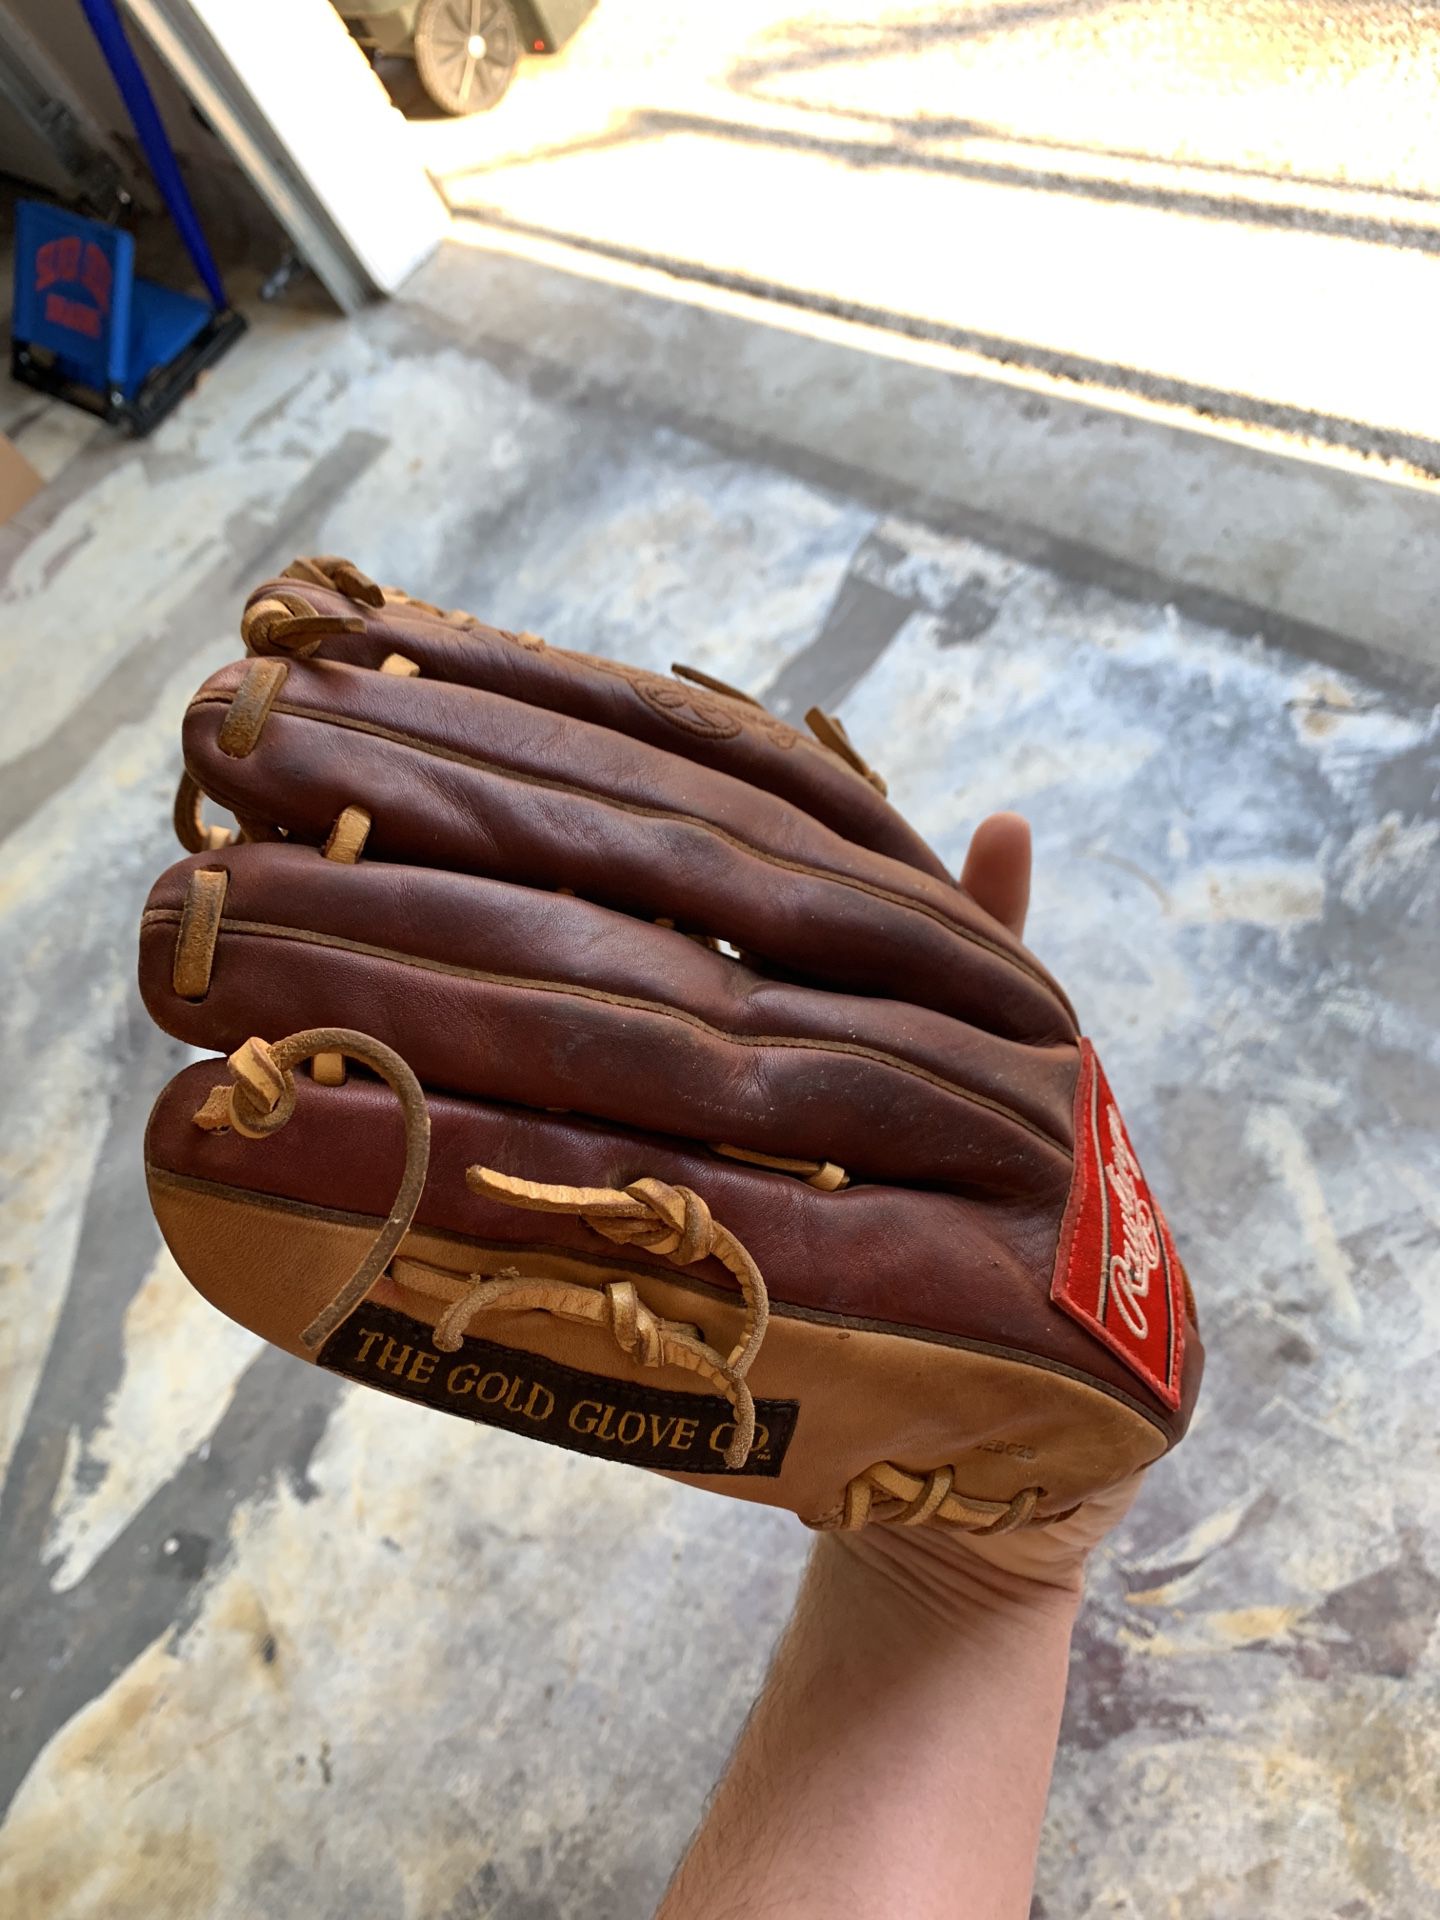 Rawlings outfielders glove pretty much brand new 50 obo